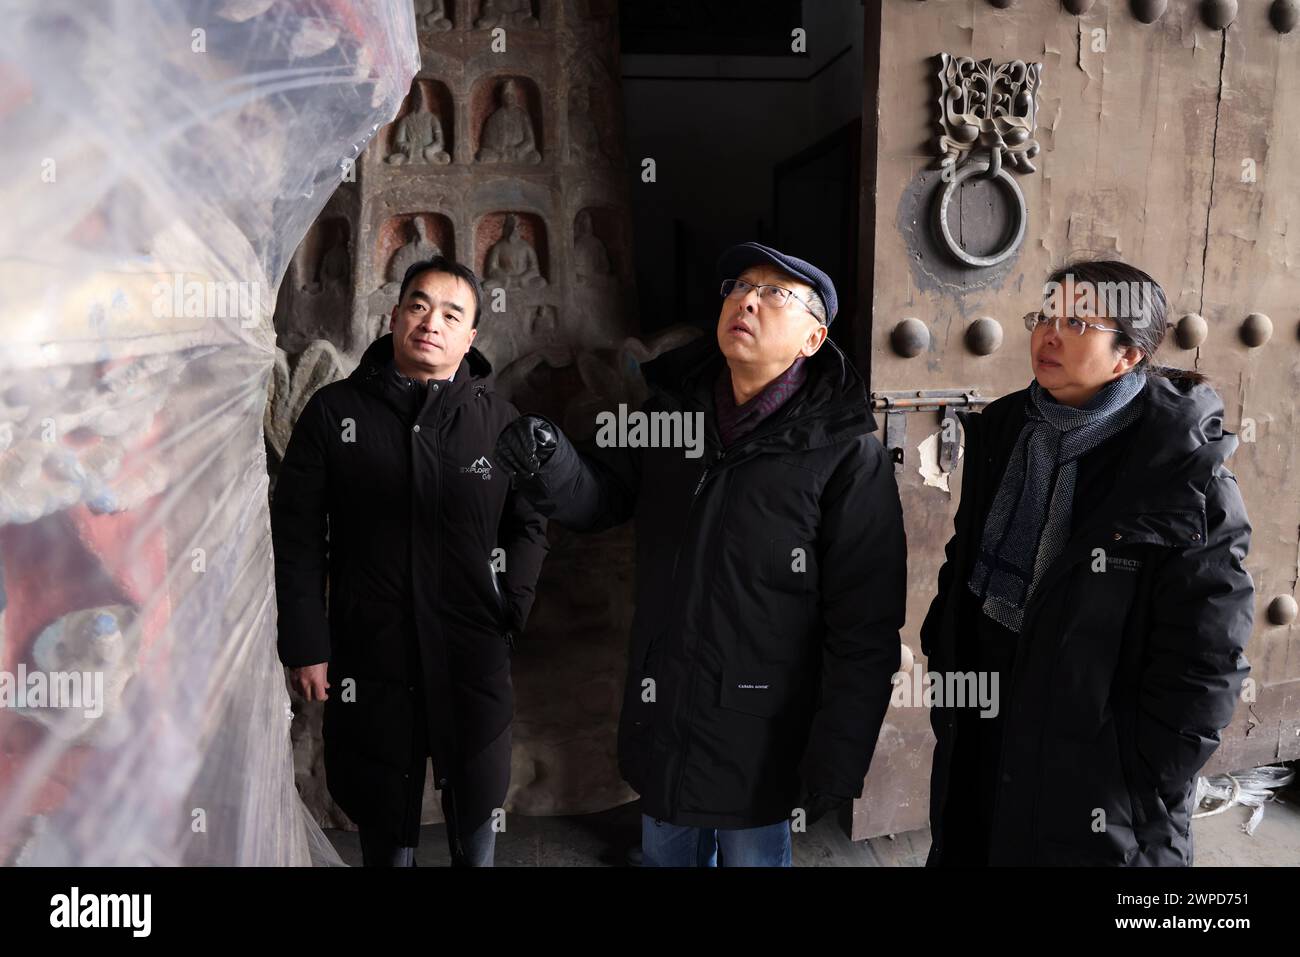 (240307) -- DATONG, March 7, 2024 (Xinhua) -- Hang Kan (C) and his colleagues exchange ideas about the preservation scheme of 3D printed model of Cave No. 12 of the Yungang Grottoes in Datong, north China's Shanxi Province, Dec. 29, 2023. Hang Kan is head of the research institute of the Yungang Grottoes, a UNESCO World Heritage site featuring over 50,000 stone Buddhist sculptures. Yungang Grottoes was built during the Northern Wei Dynasty (386-534). It is considered a pinnacle of Chinese Buddhist art and represents the highest level of sculptural artistry in the world during the 5th centu Stock Photo